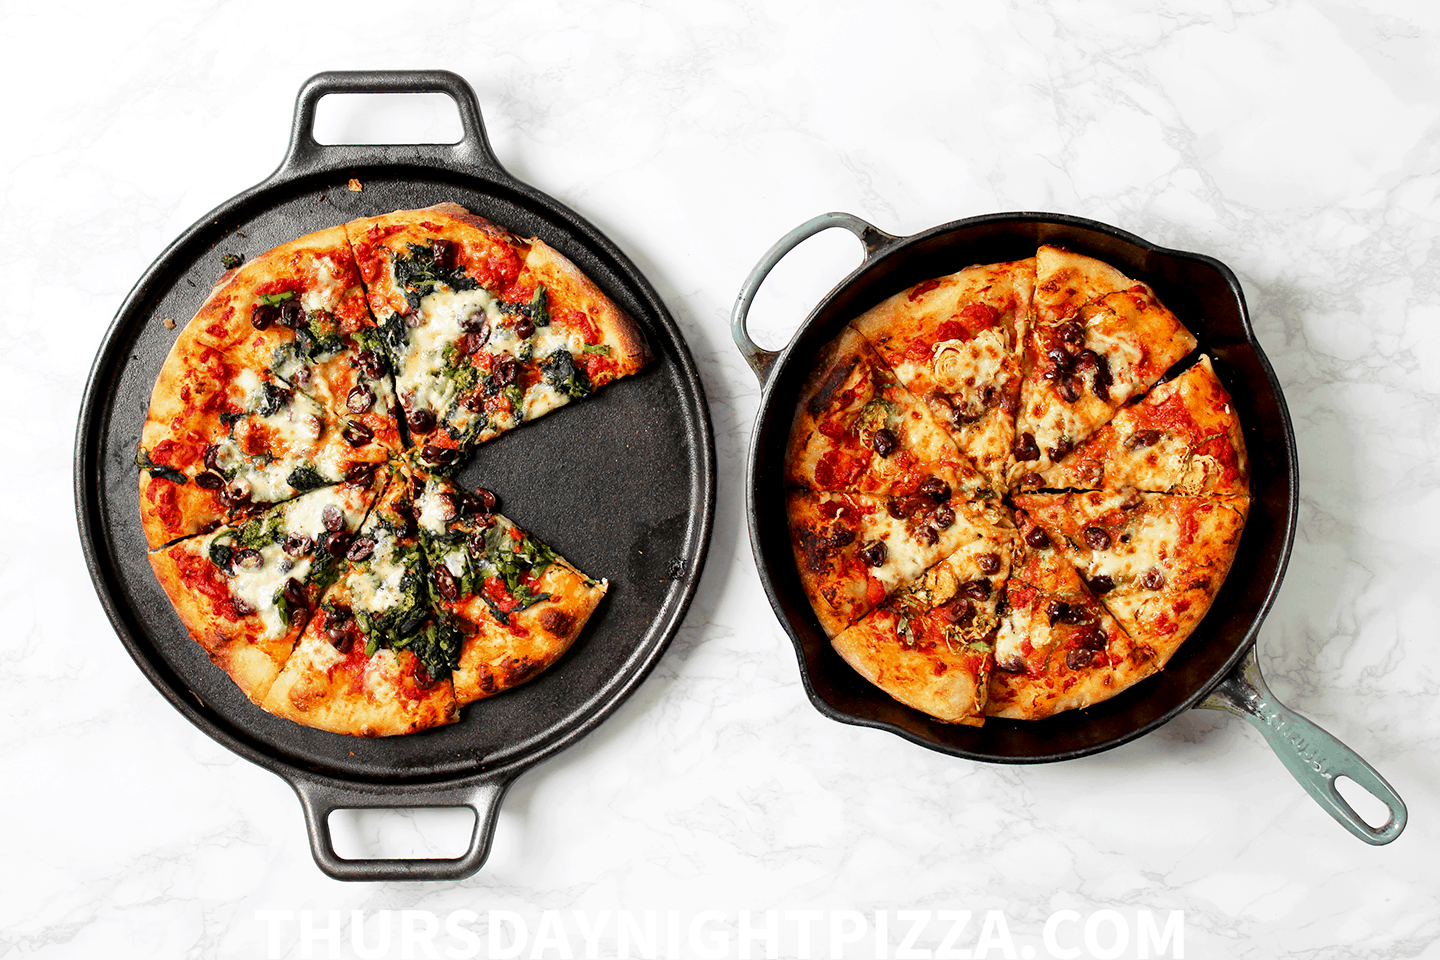 How To Make Cast Iron Skillet (Pan) Pizza - Thursday Night Pizza